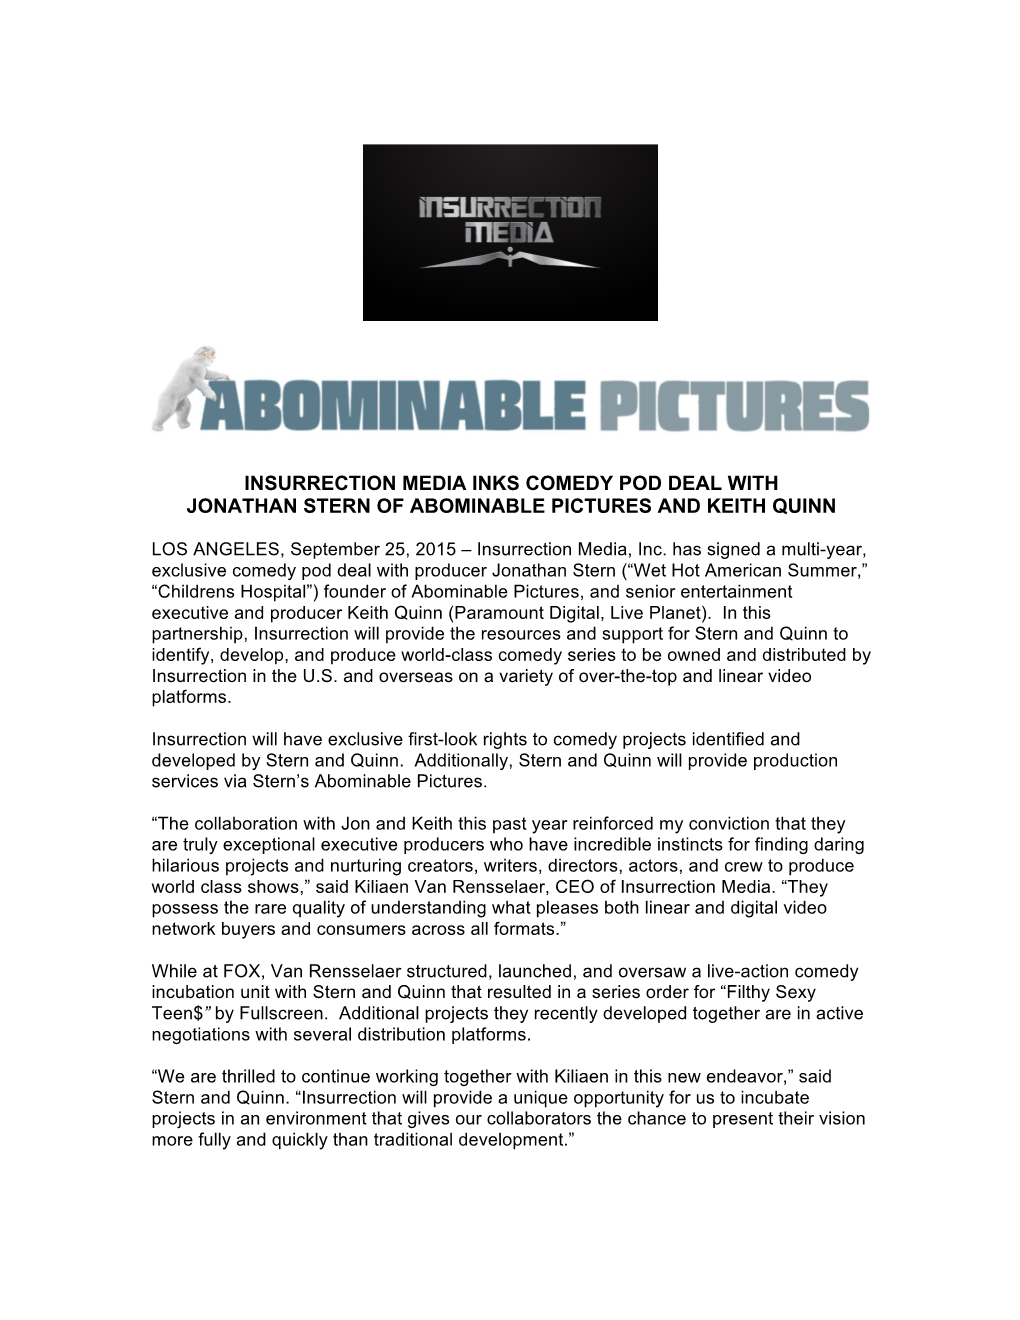 Insurrection Media Inks Comedy Pod Deal with Jonathan Stern of Abominable Pictures and Keith Quinn